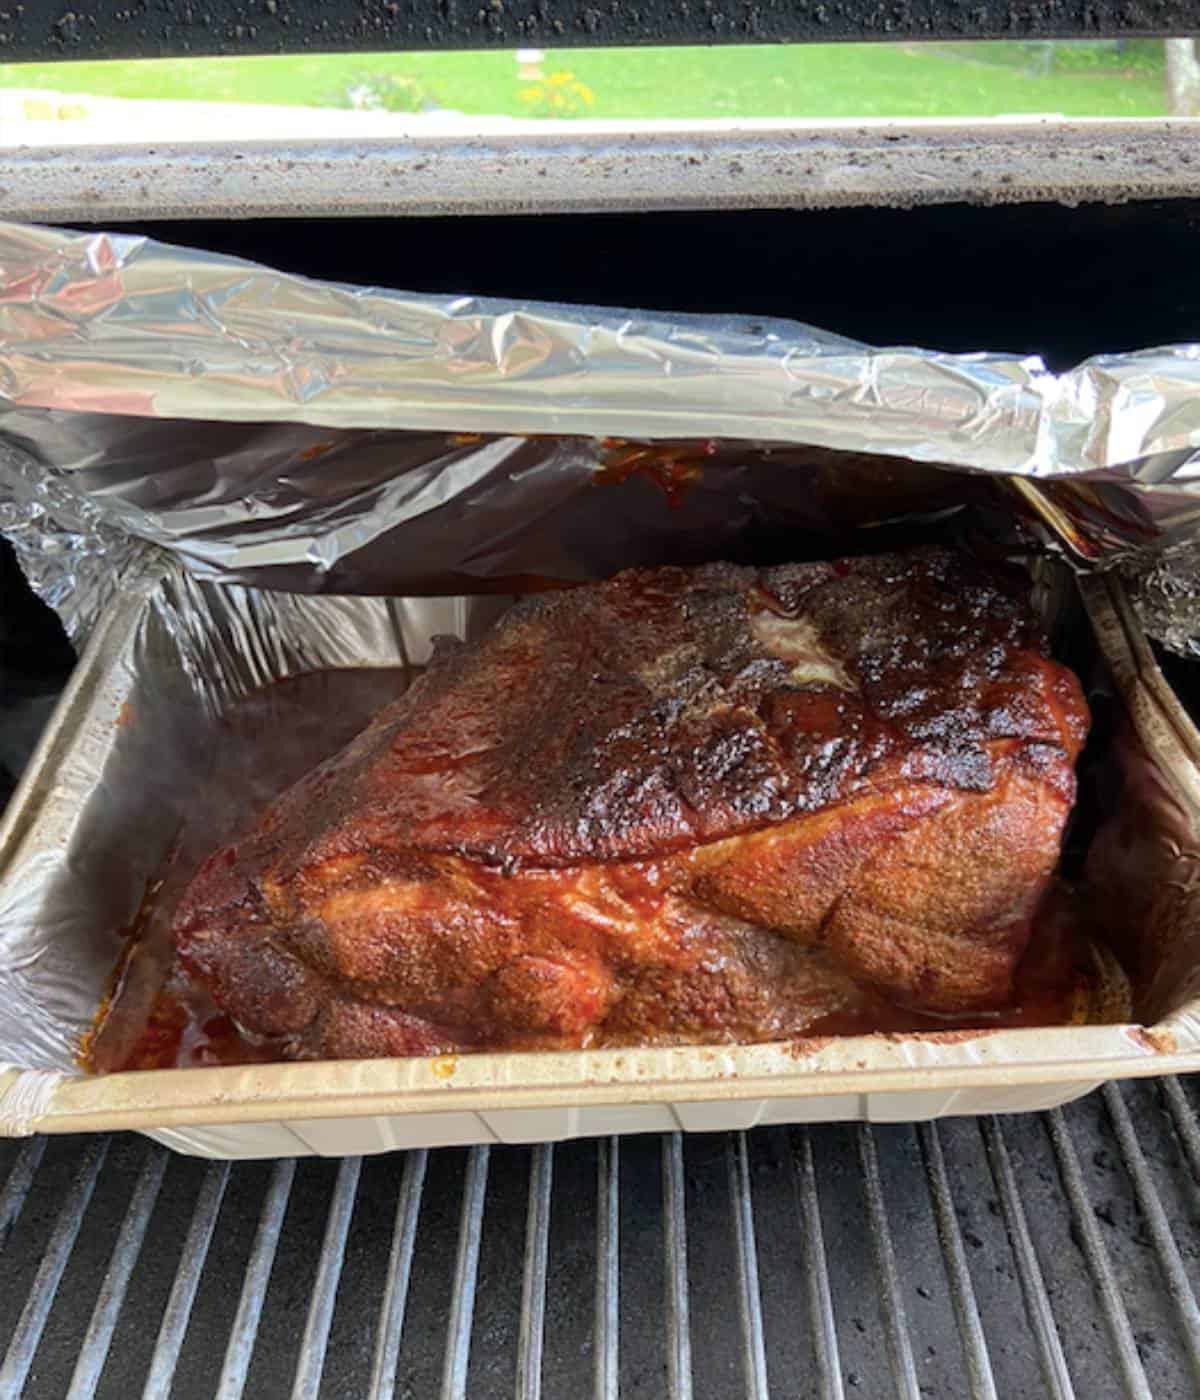 BBQ sauce, brown sugar, and butter added to pork butt in smoker.